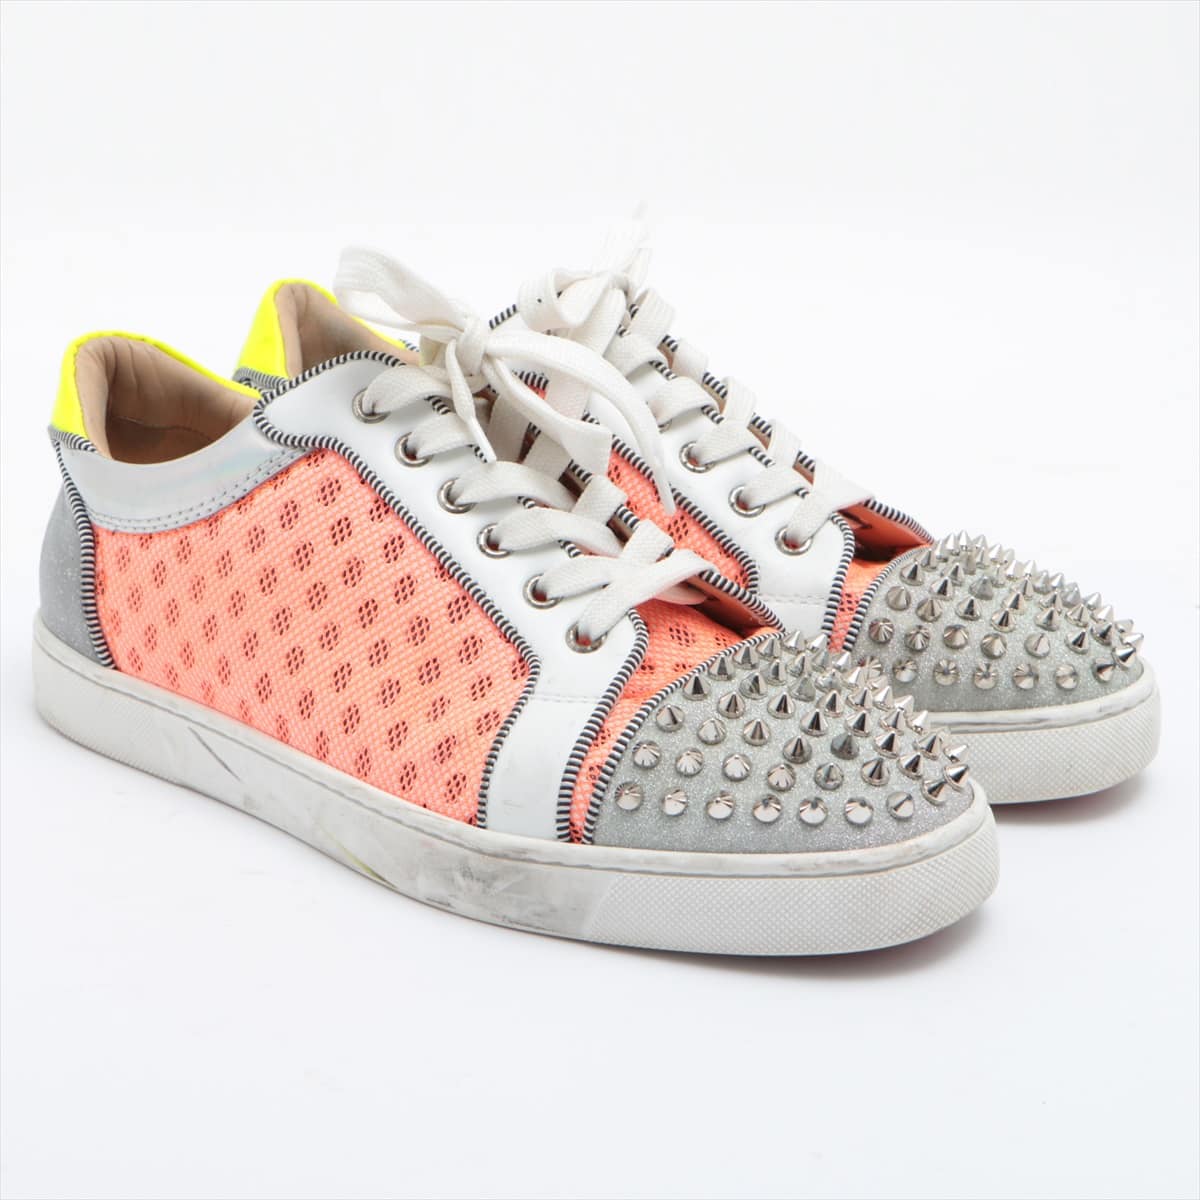 Christian Louboutin Louis Jr. Leather x fabric Sneakers 40.5 Men's Orange There are cigarette extinguishing marks